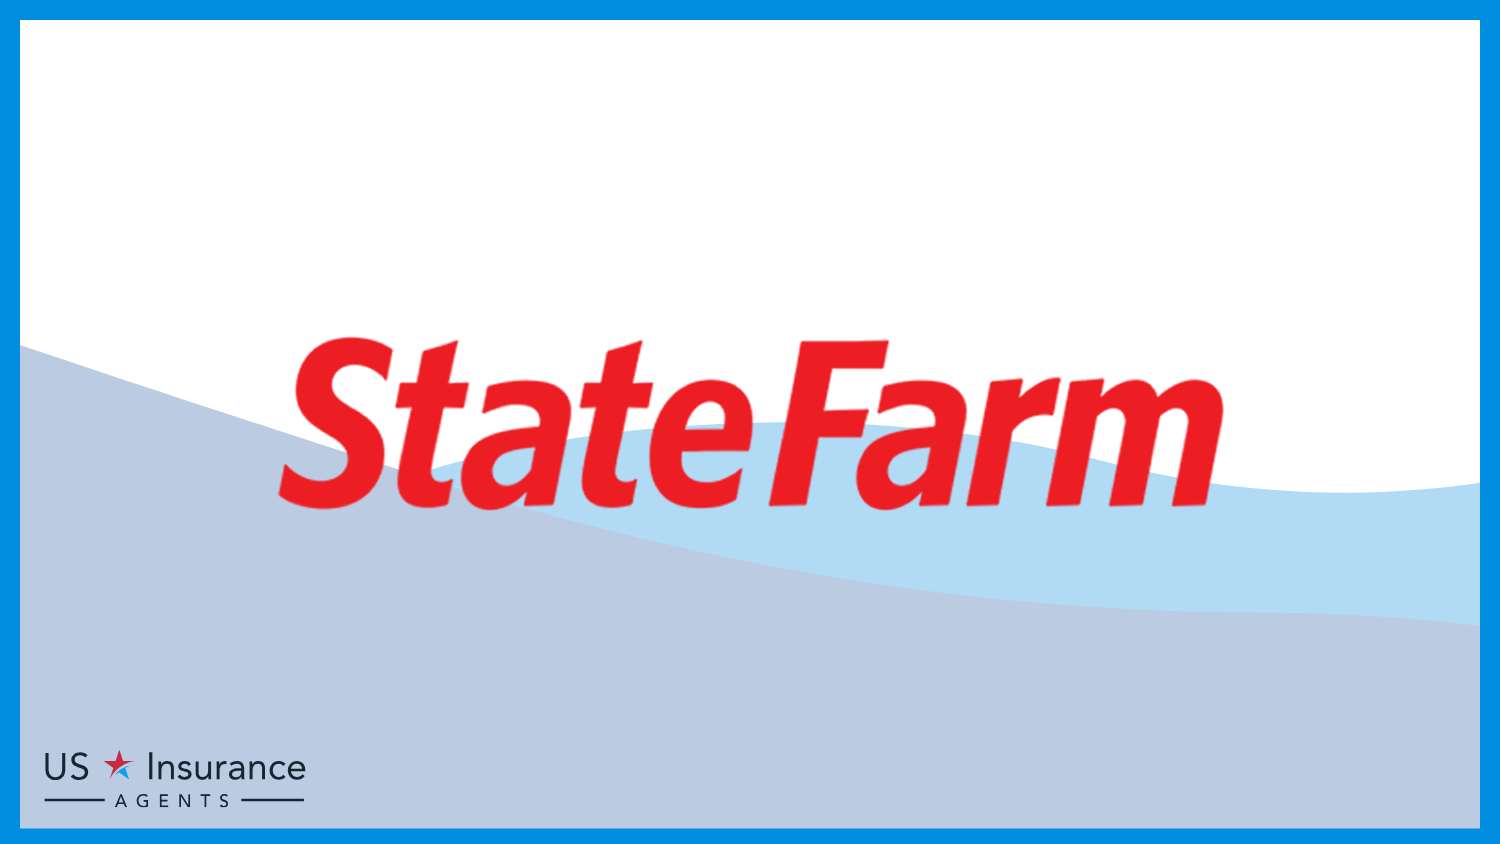 State Farm: Best Business Insurance for Axe-Throwing Companies